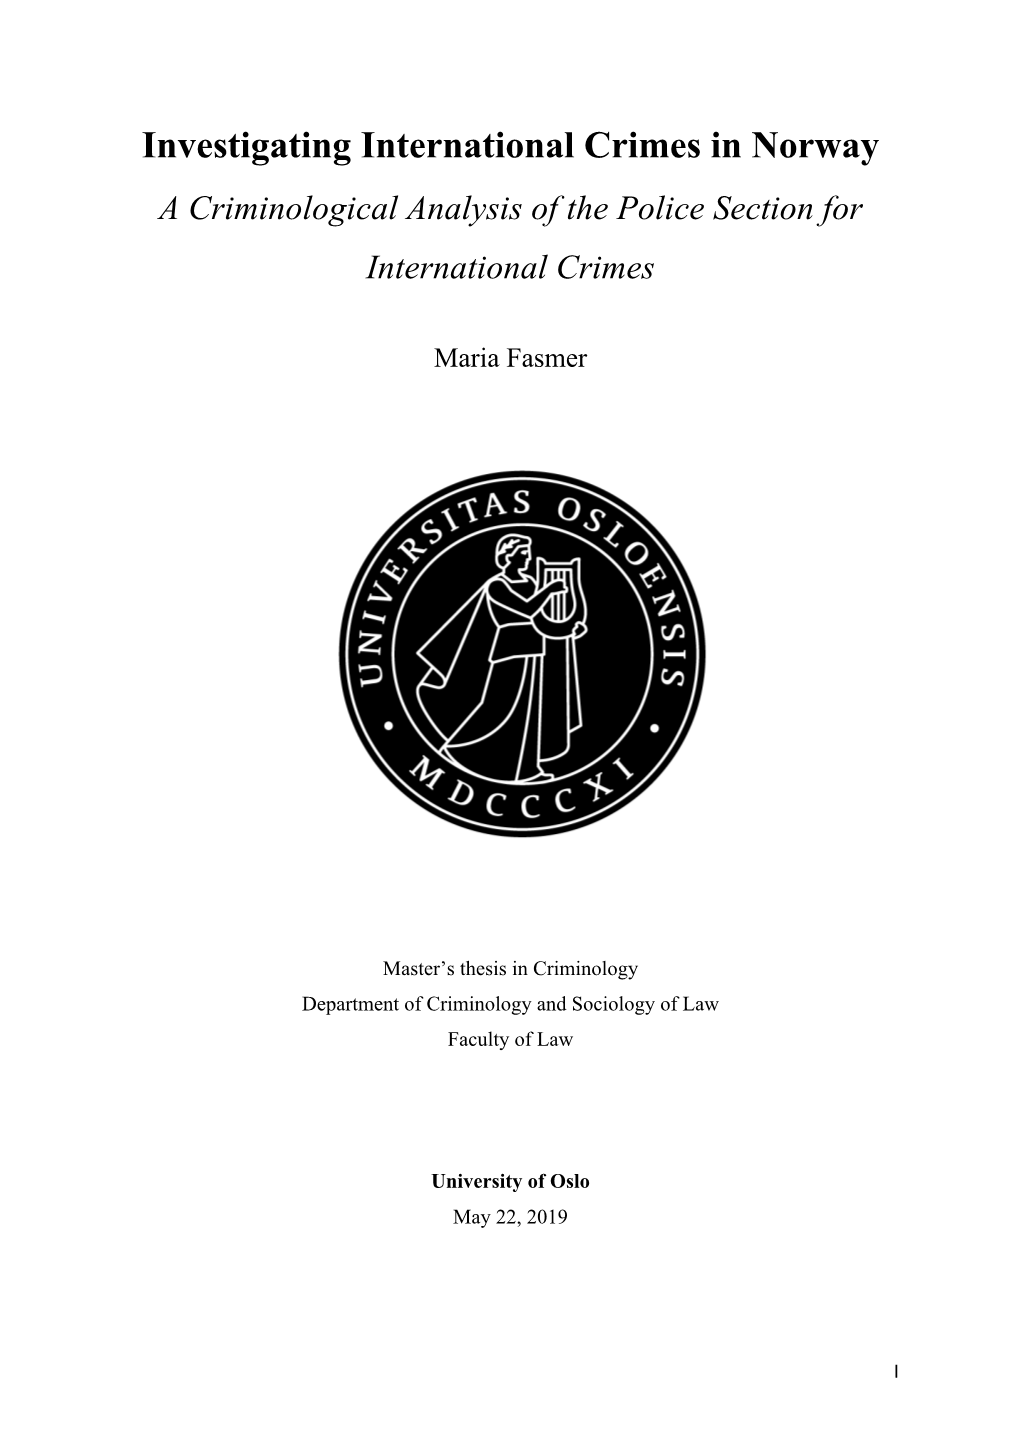 Investigating International Crimes in Norway a Criminological Analysis of the Police Section for International Crimes